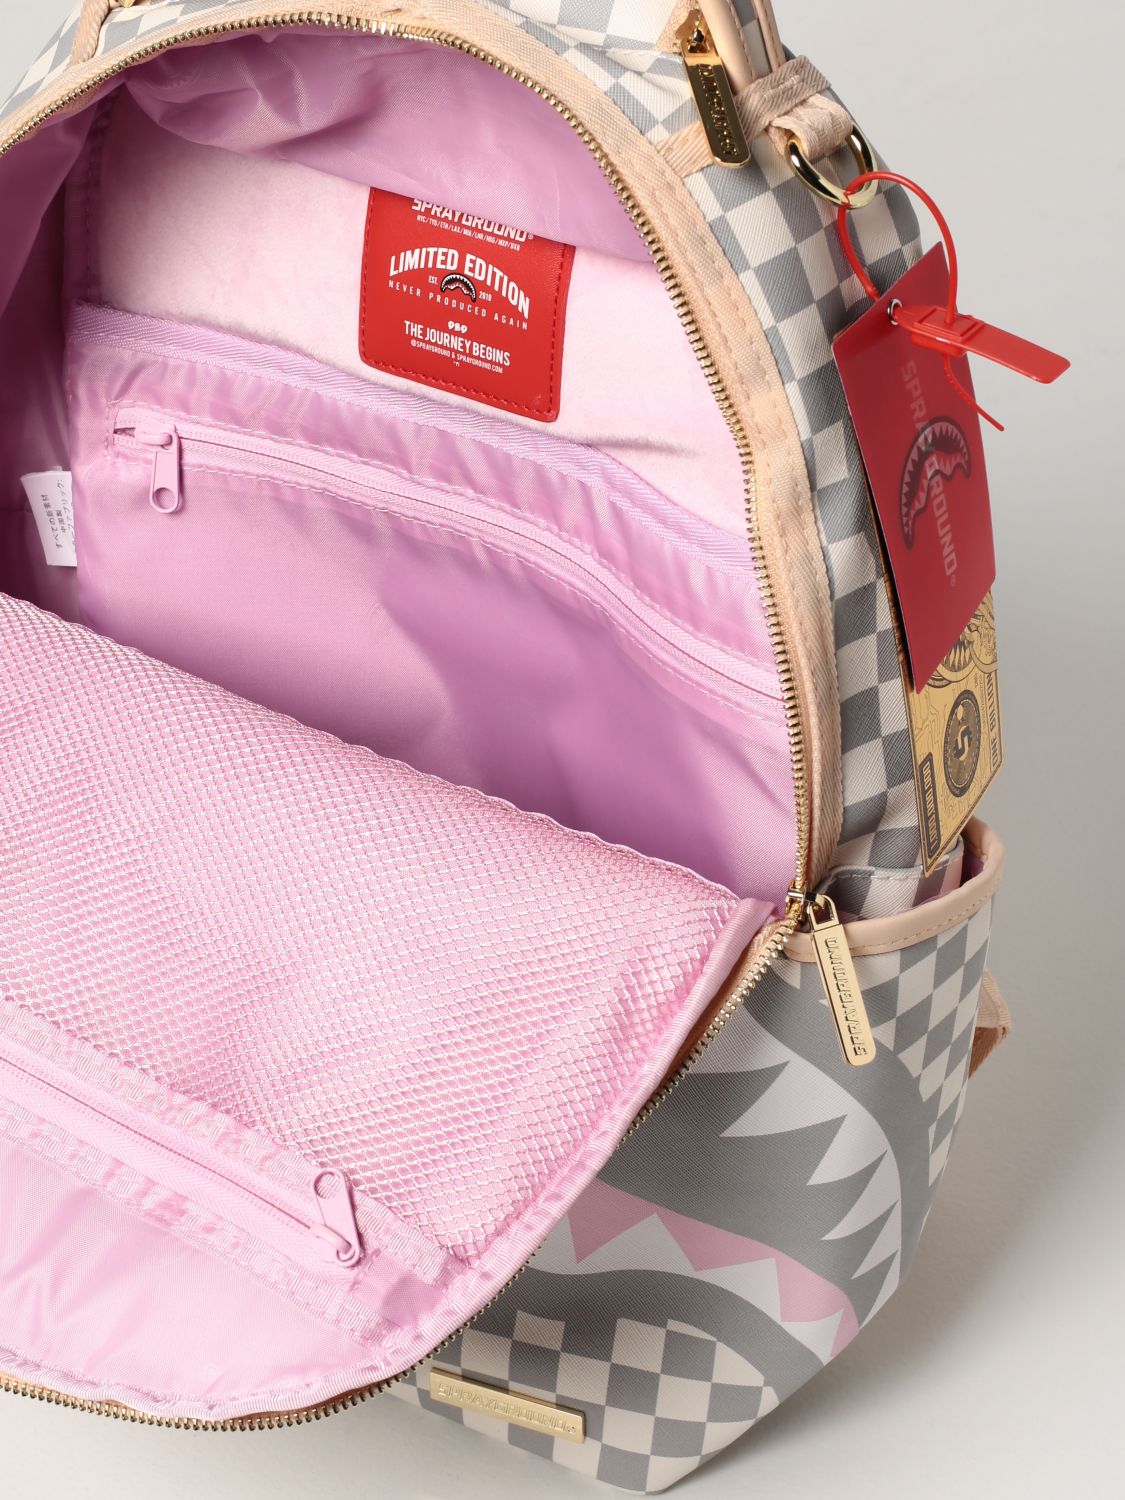 Sprayground Backpack In Vegan Leather With Shark Print In Pink